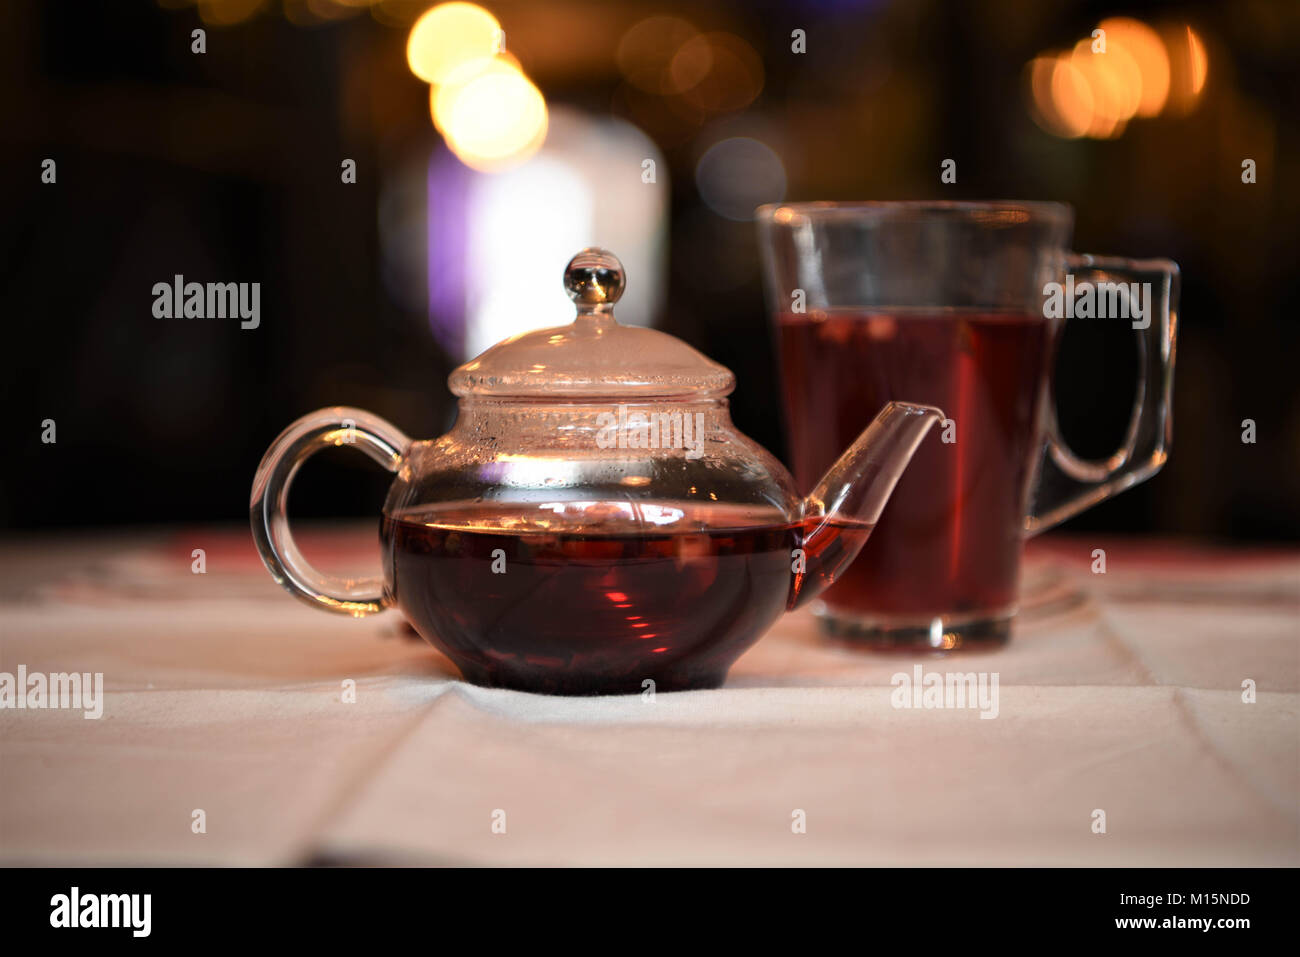 drink image of a hot fruit flavored red color tea made in a glass teapot with poured glass cup and with bokeh blurred light background and atmosphere Stock Photo